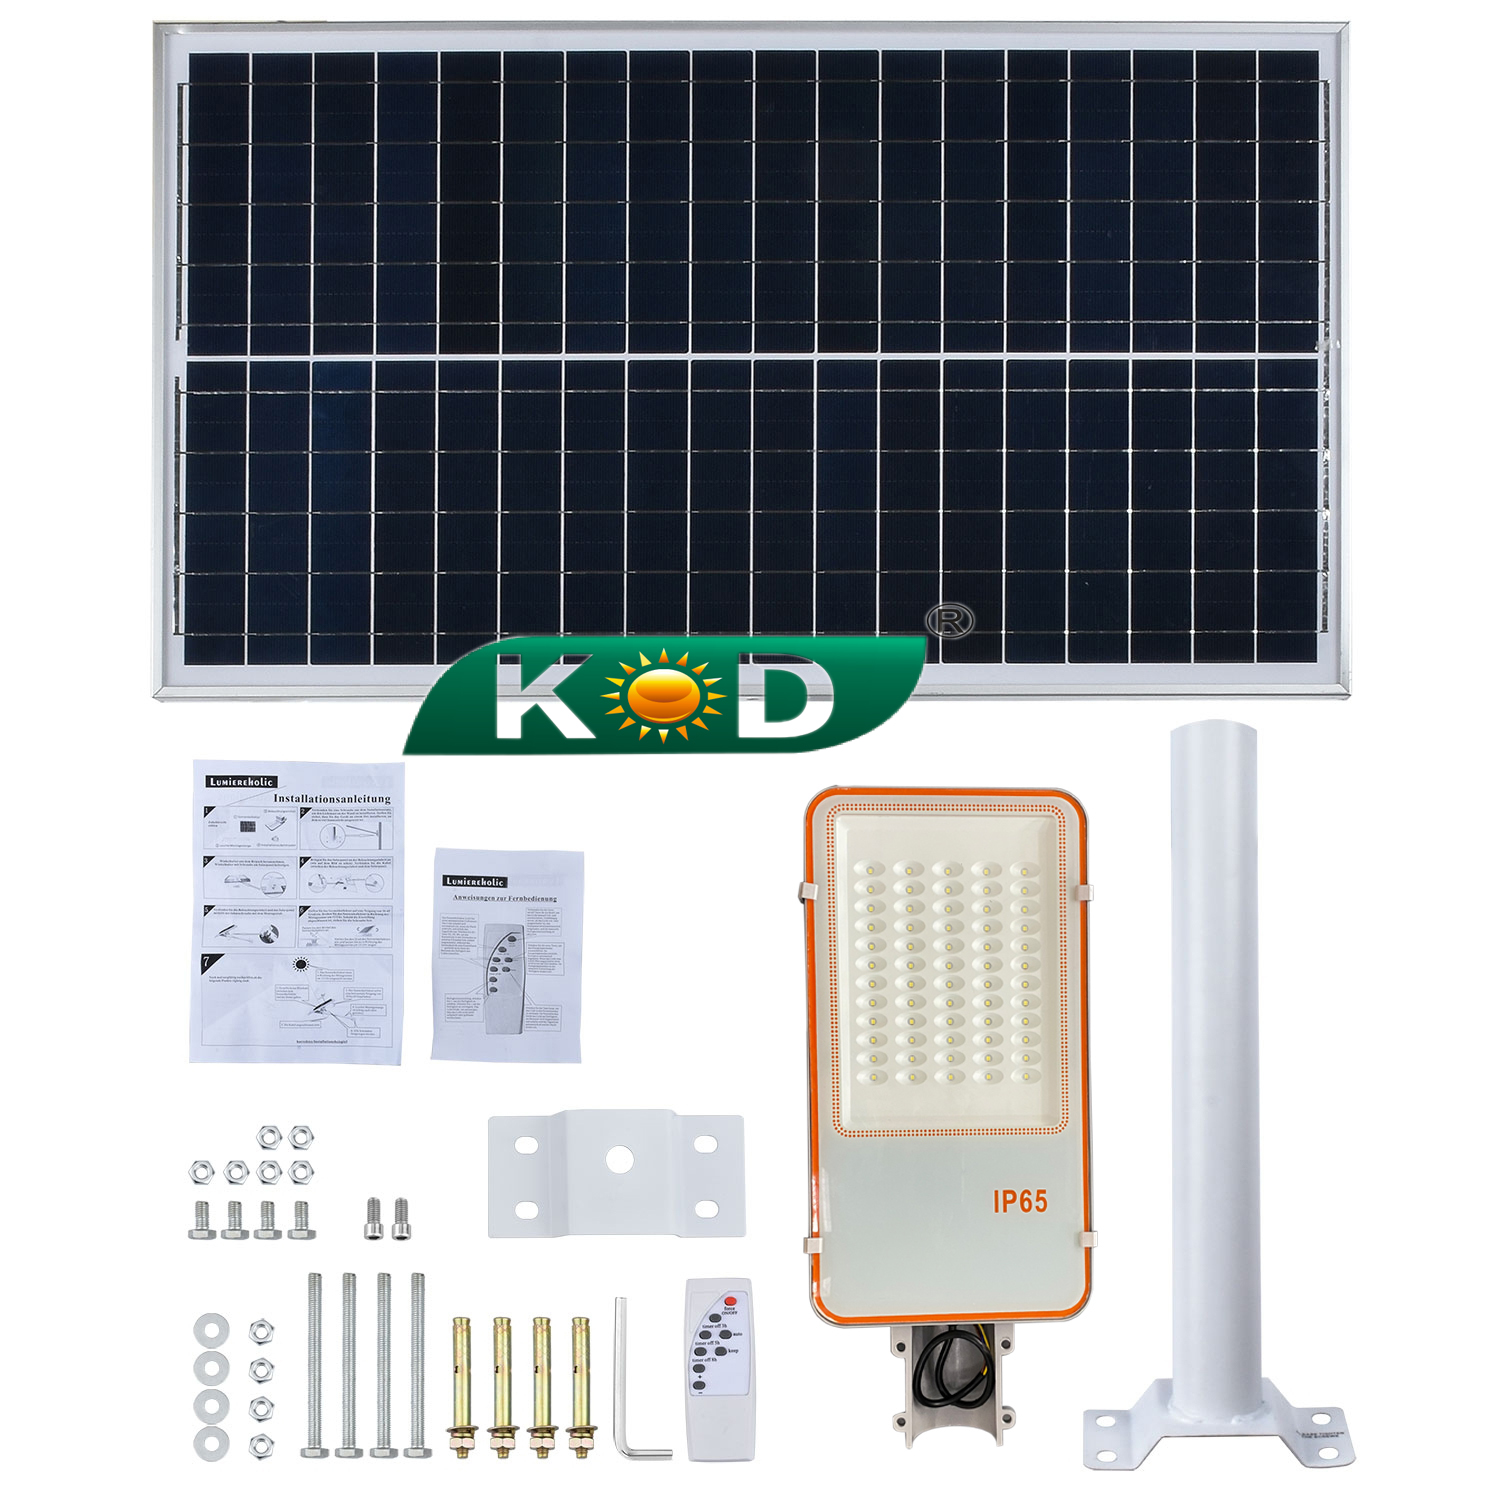 1000Lm 50W of Light Sensor+remote Controler for Two Mode of Lighting for LED Solar Street Light From China Manufacturer